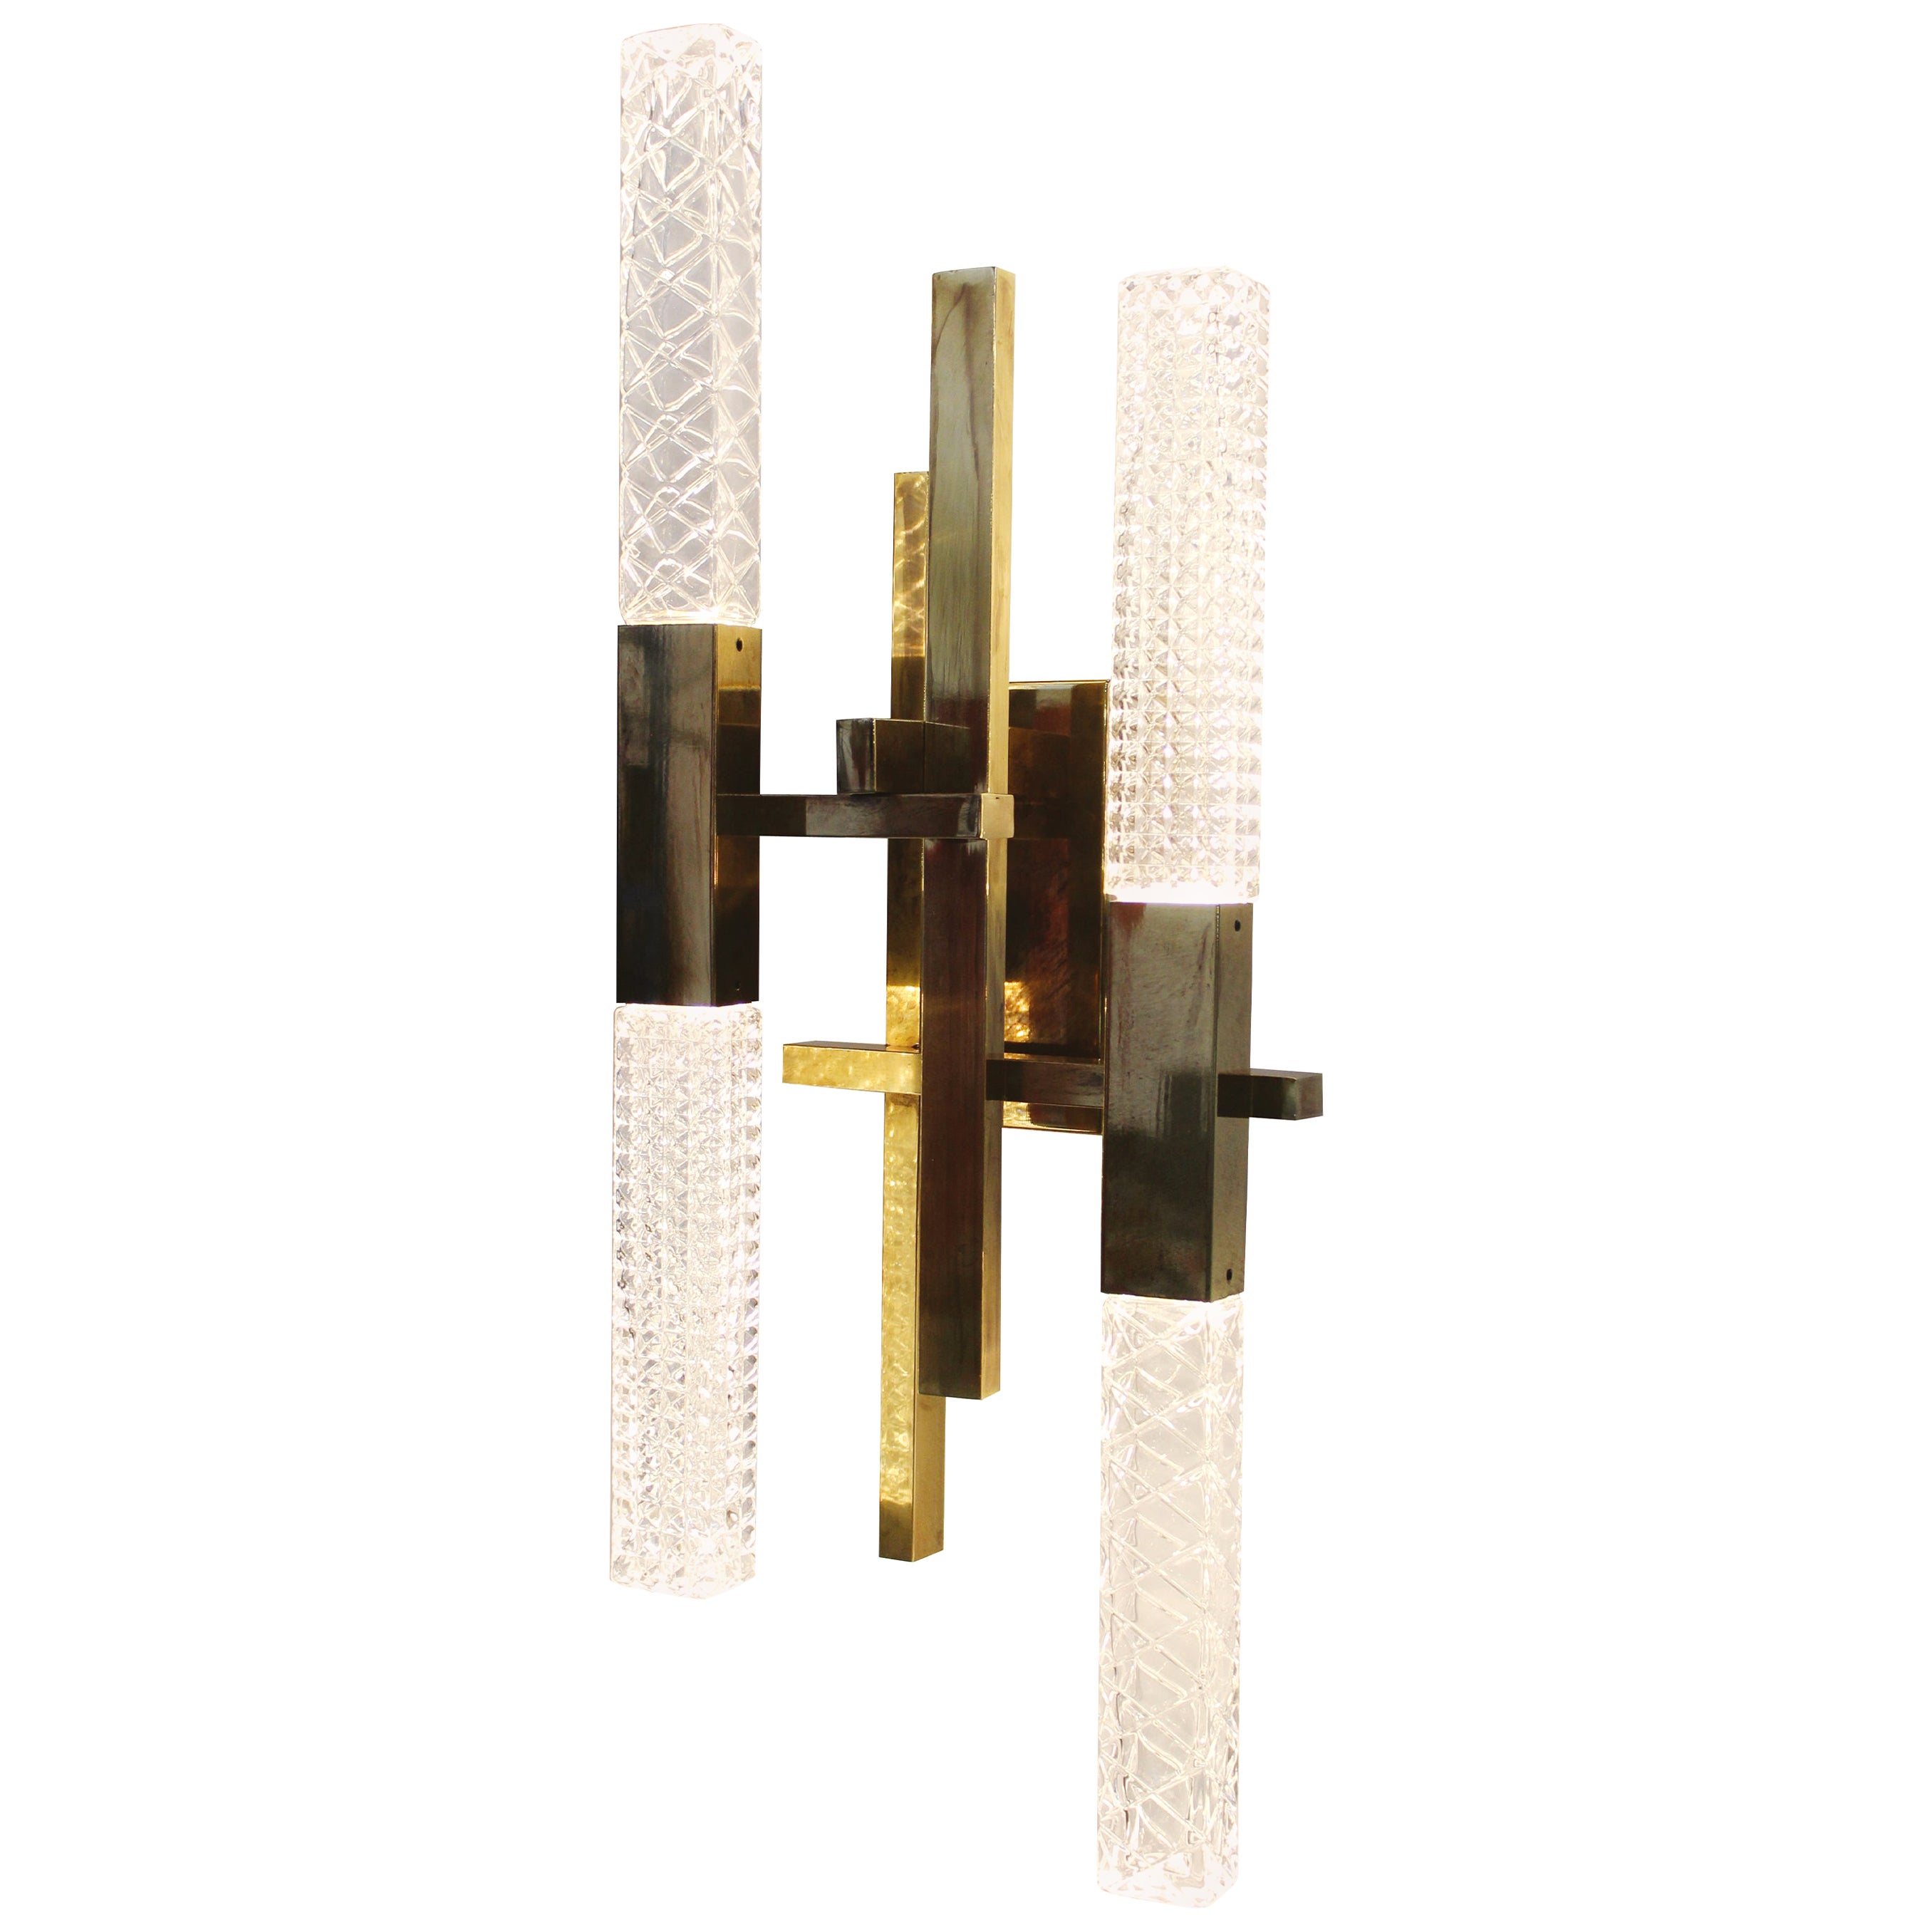 Mikado Wall Lamp in Satin Brass and Crystal Diffusers